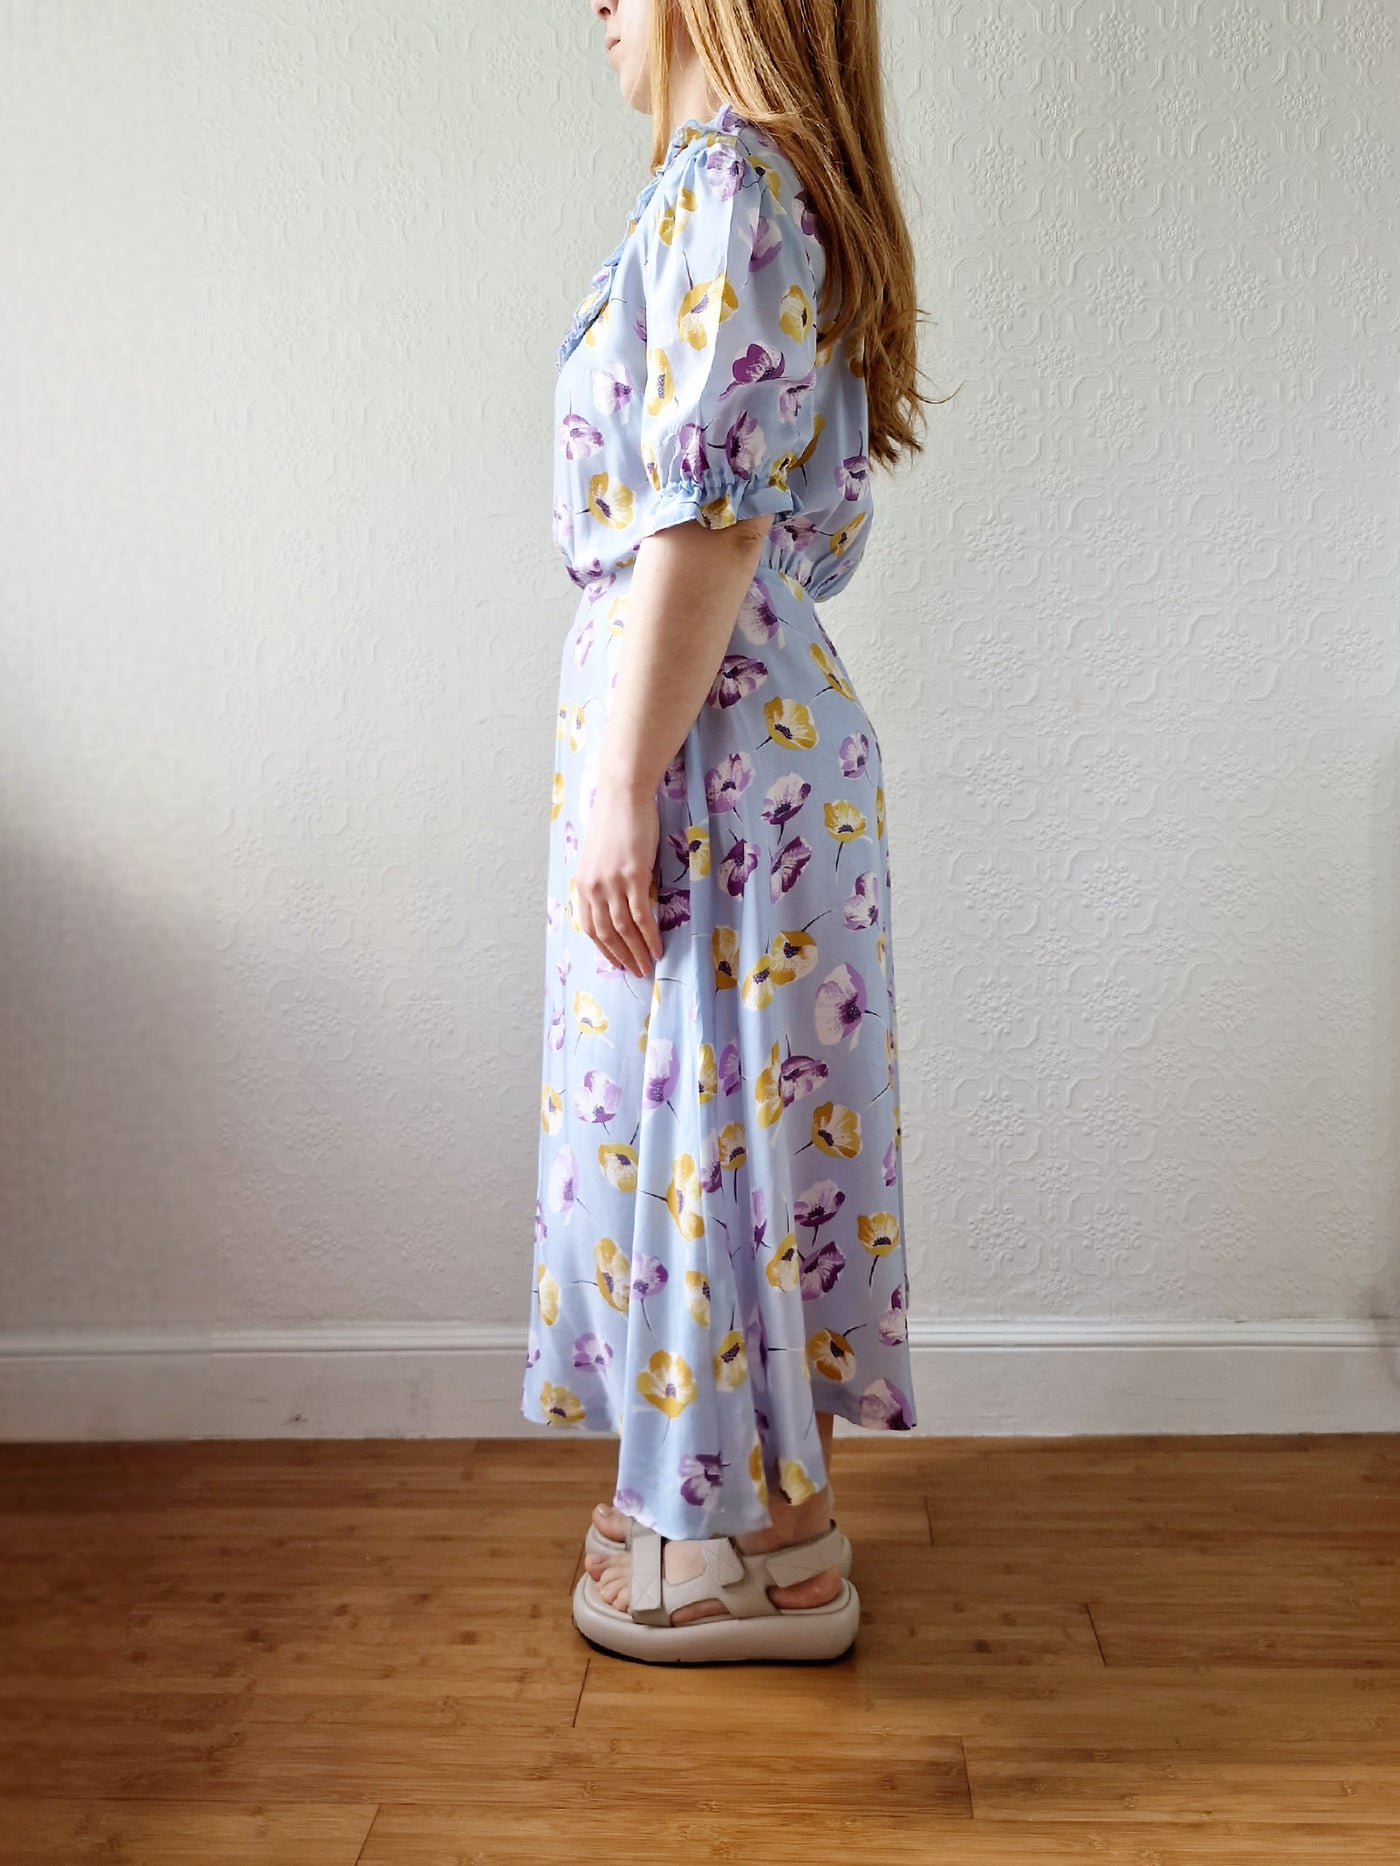 Vintage 70s Light Blue Floral Dress with Puff Sleeves - S